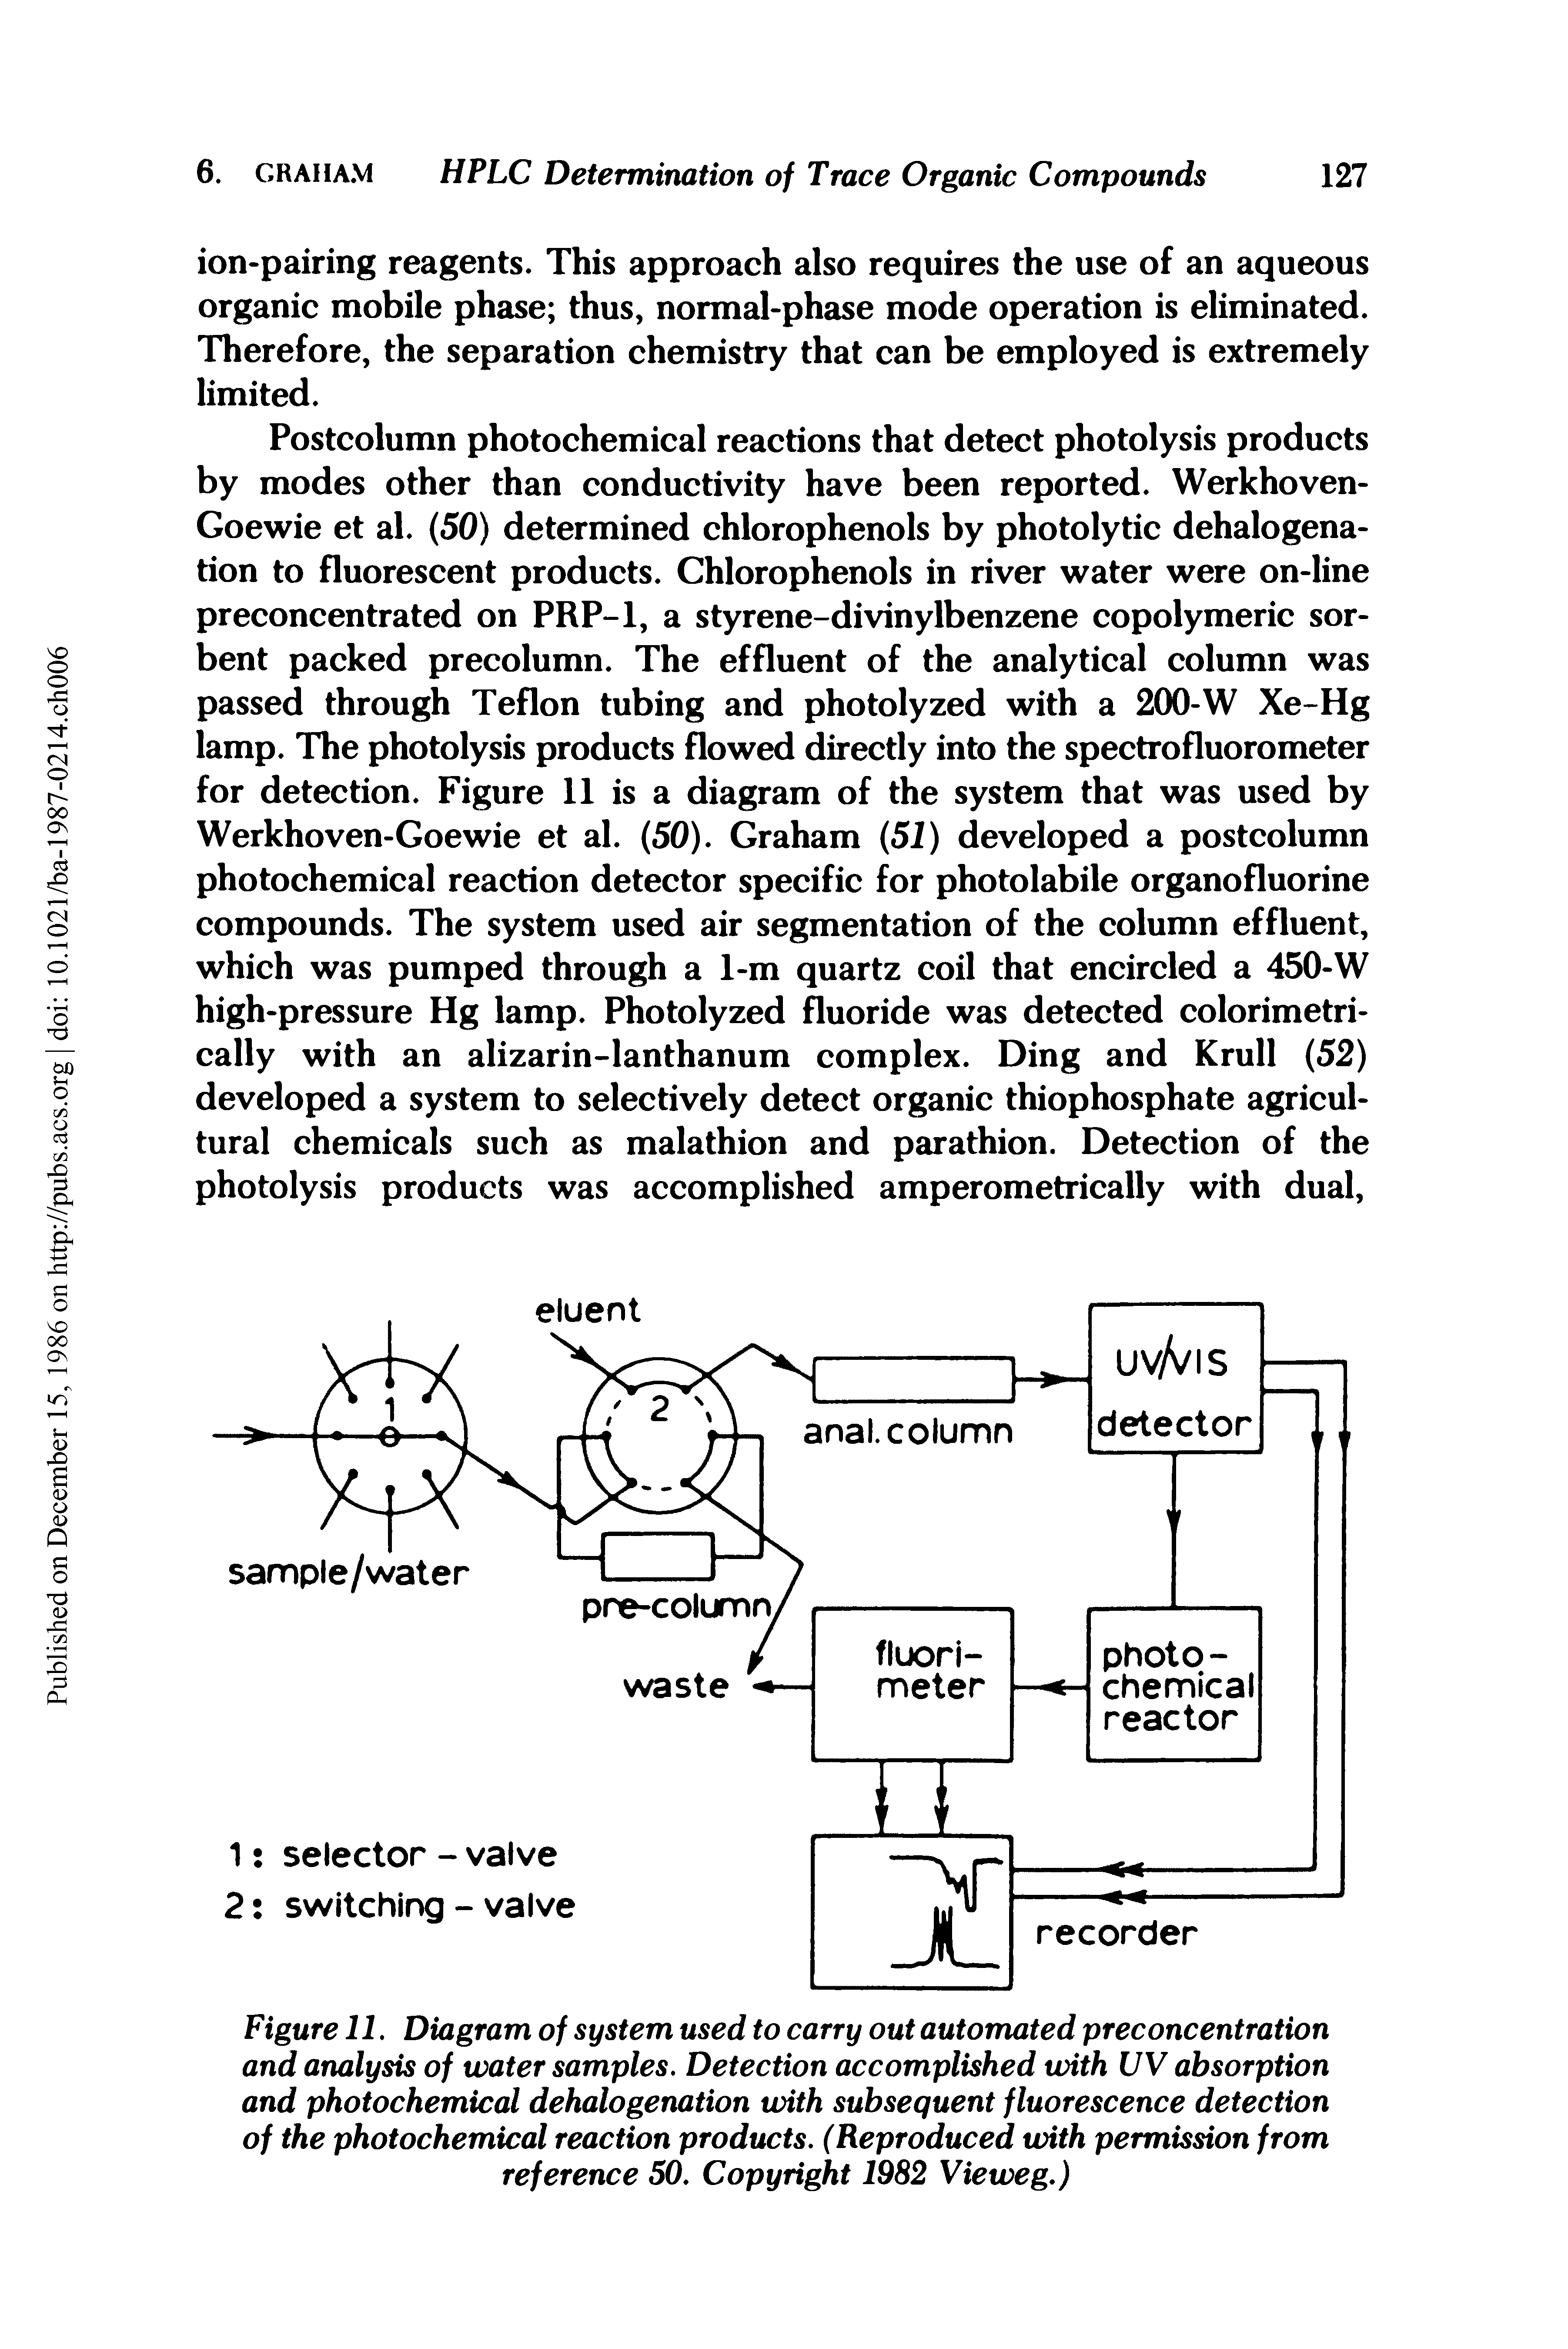 Figure 11. Diagram of system used to carry out automated preconcentration and analysis of water samples. Detection accomplished with UV absorption and photochemical dehalogenation with subsequent fluorescence detection of the photochemical reaction products. (Reproduced with permission from reference 50. Copyright 1982 Vieweg.)...